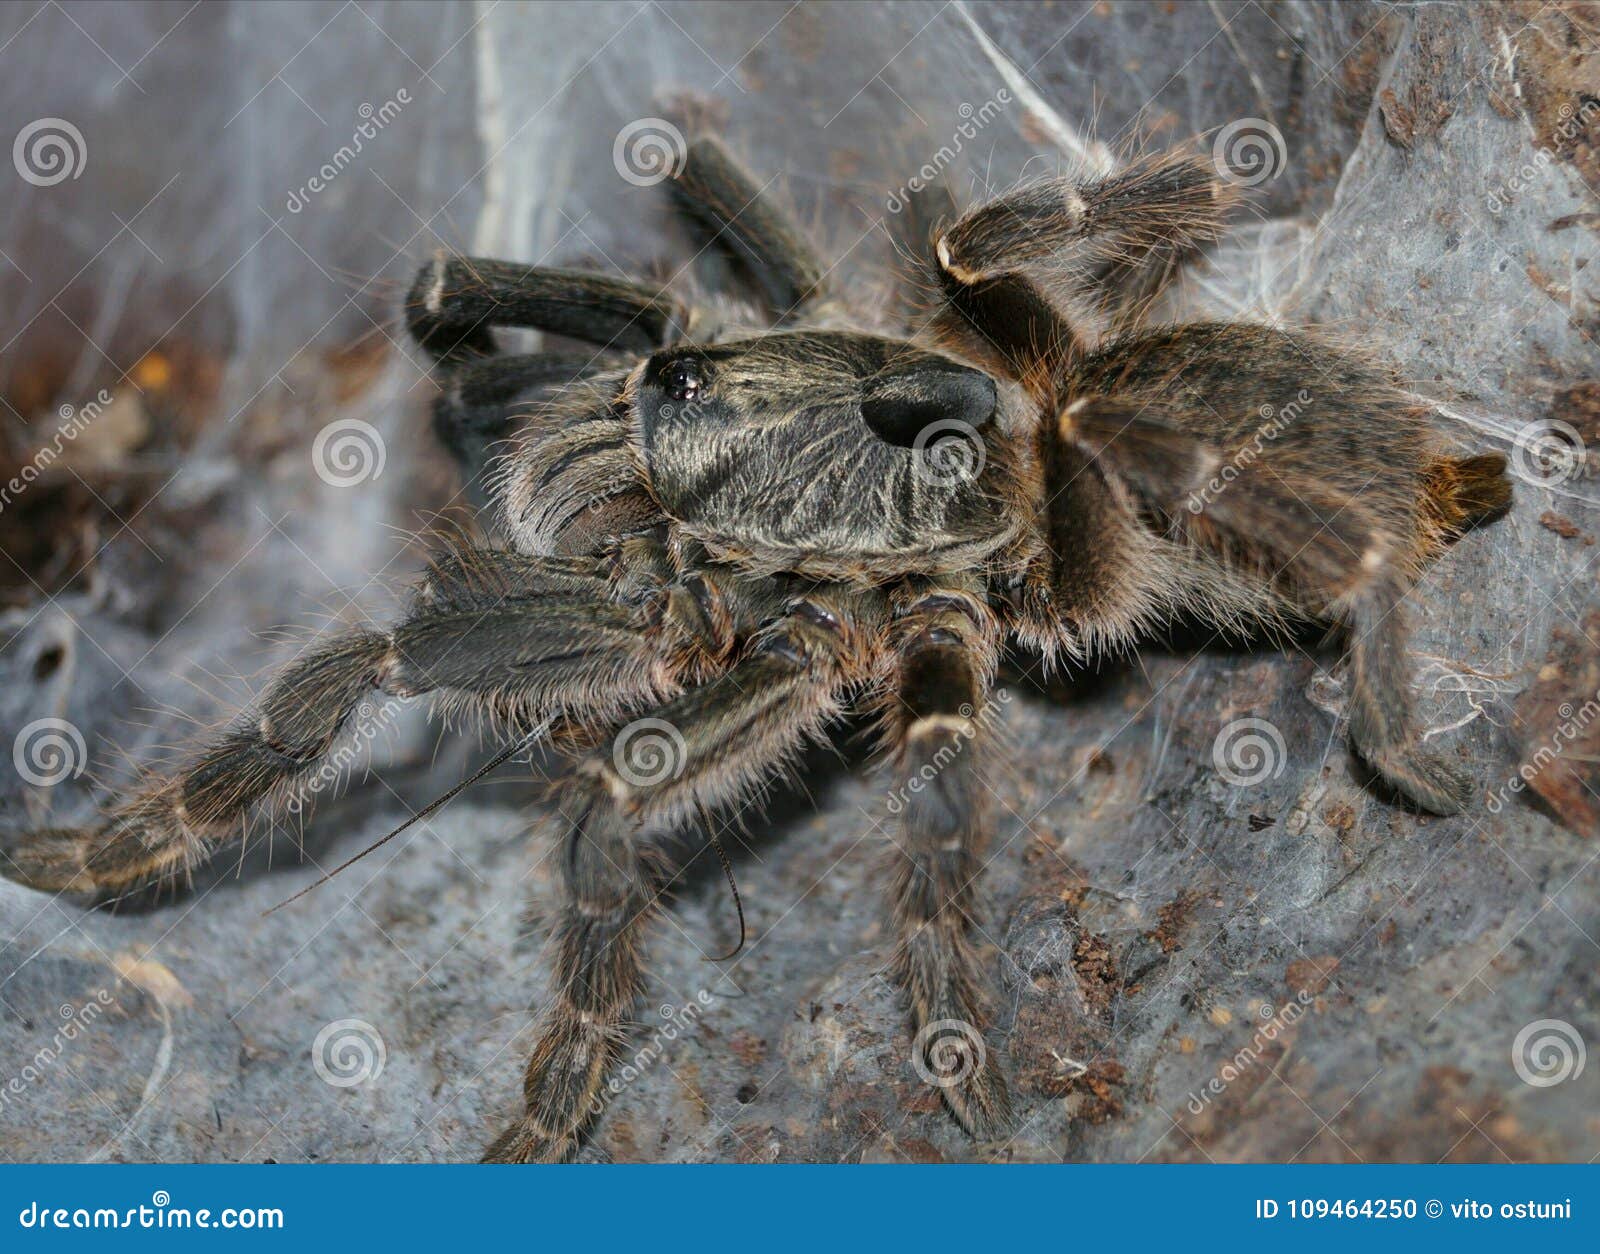 Spider grow big stock photo. Image of spider, grow, nature - 109464250